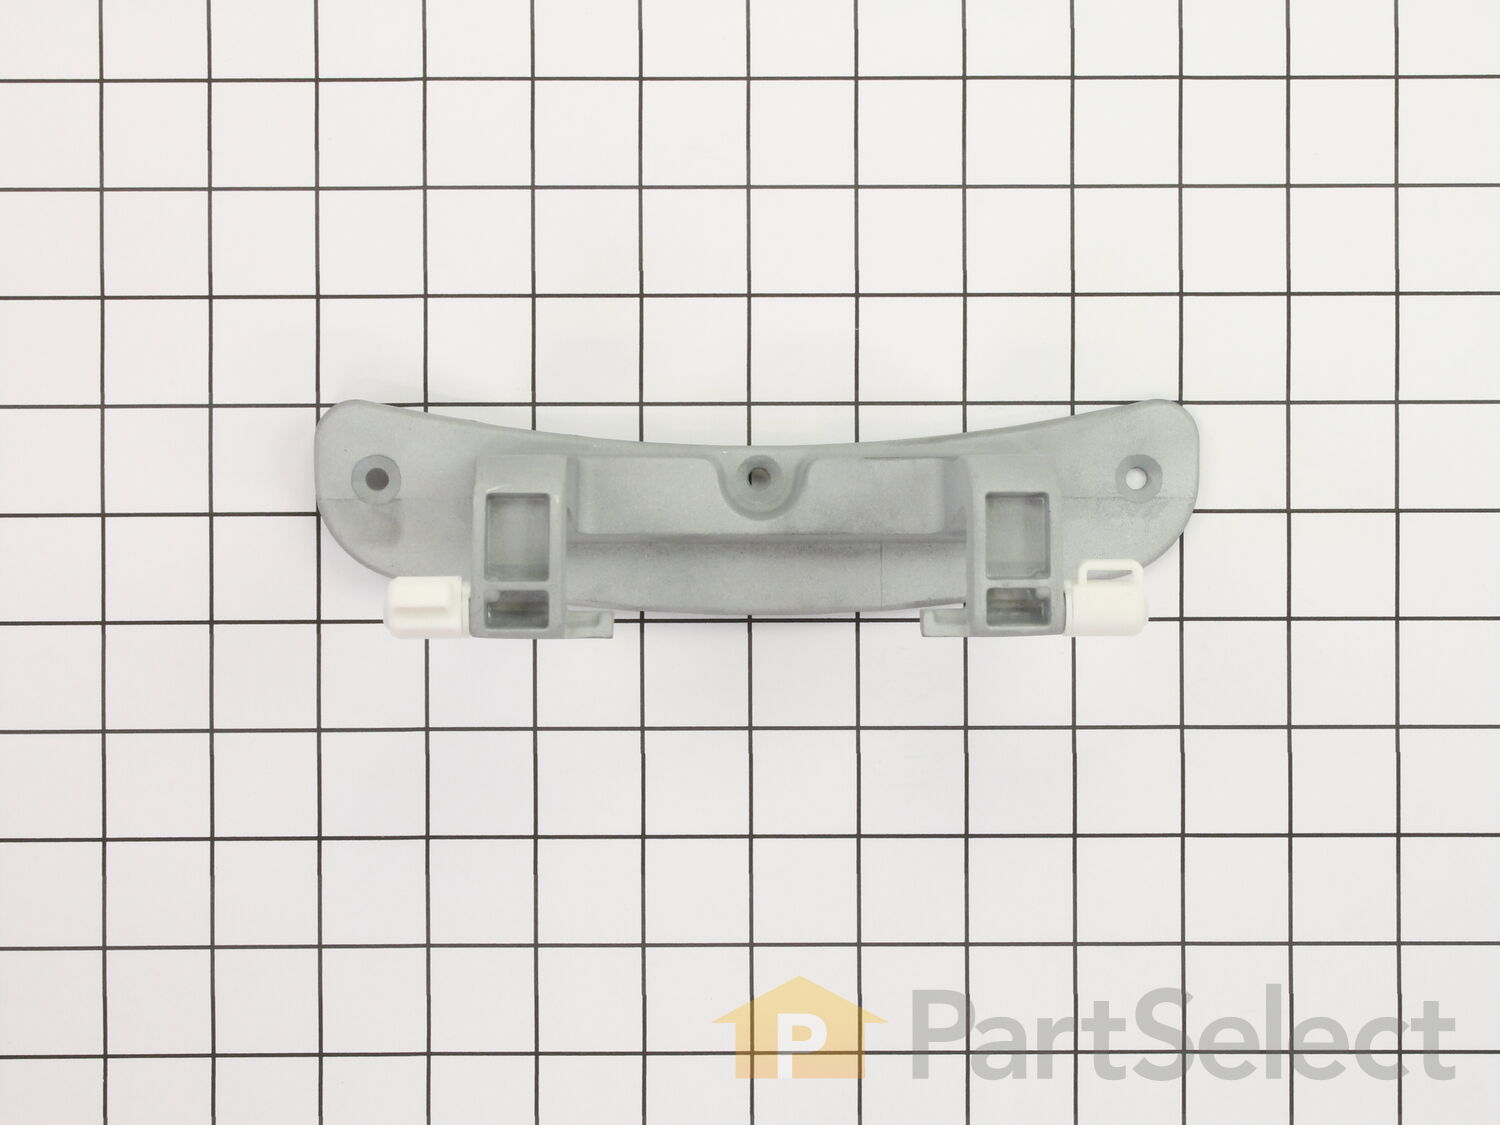 240311303 EA899288 PS899288/ Washer Hinge for Refrigerator-Replaces 1036095 AP3559694 240311301 AH899288